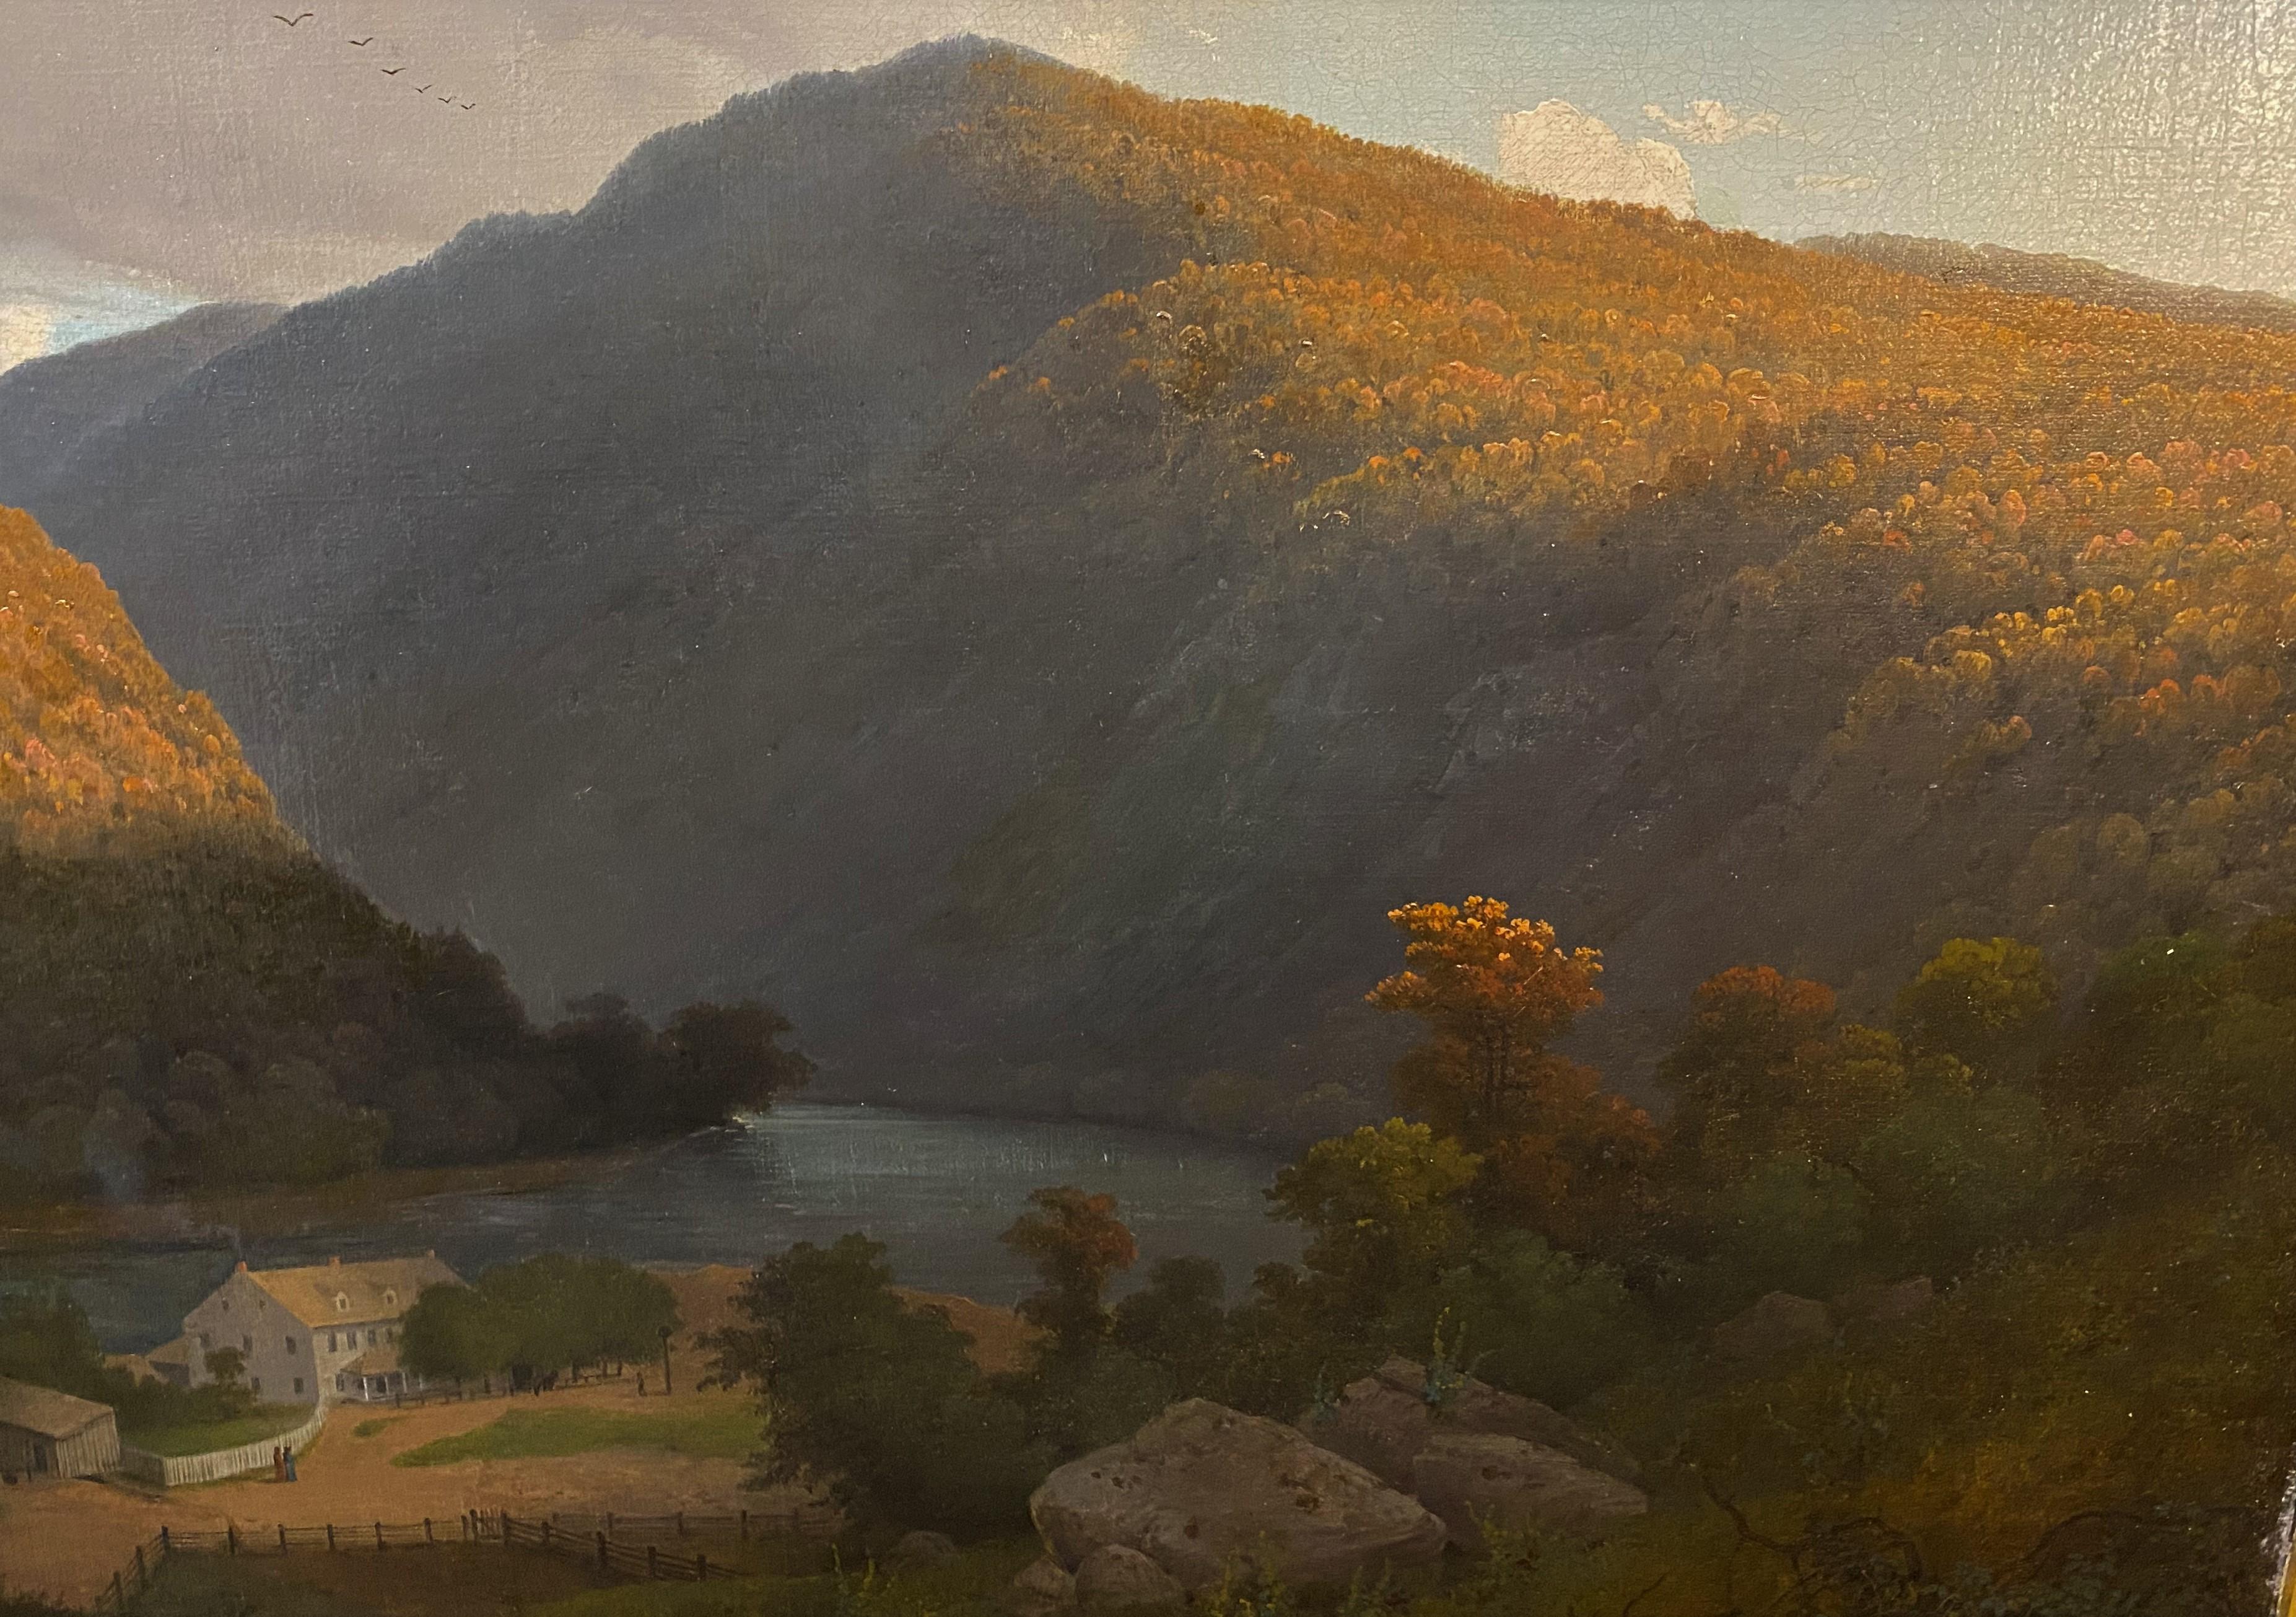 A finely detailed oil landscape of the Delaware Gap attributed to French American artist Regis Francois Gignoux (1816-1882). Gignoux was born in Lyon, France, and began his studies in Fribourg, Switzerland and then at the St. Pierre Academie in